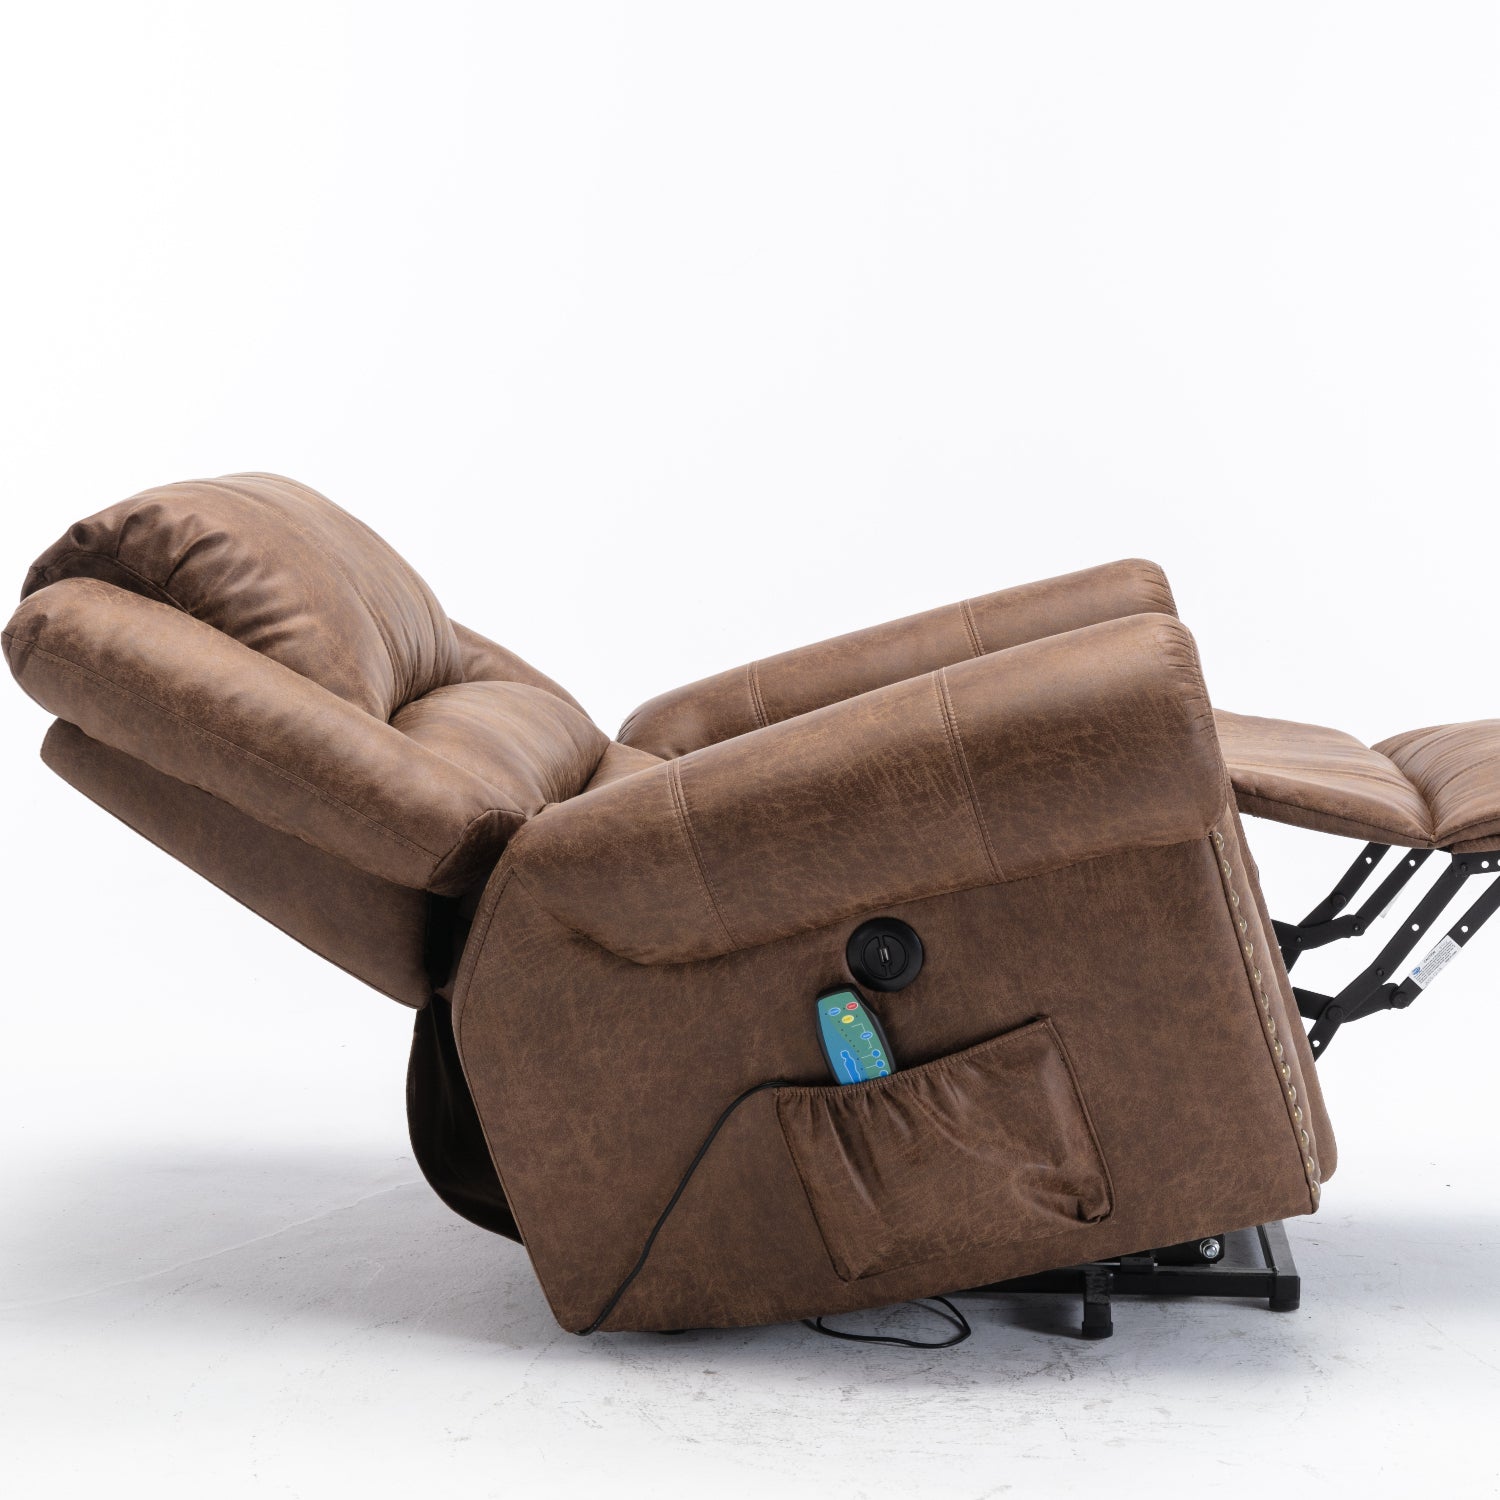 Nut Brown Power Lift Recliner Chair with Massage and Heat, fully reclined, side view